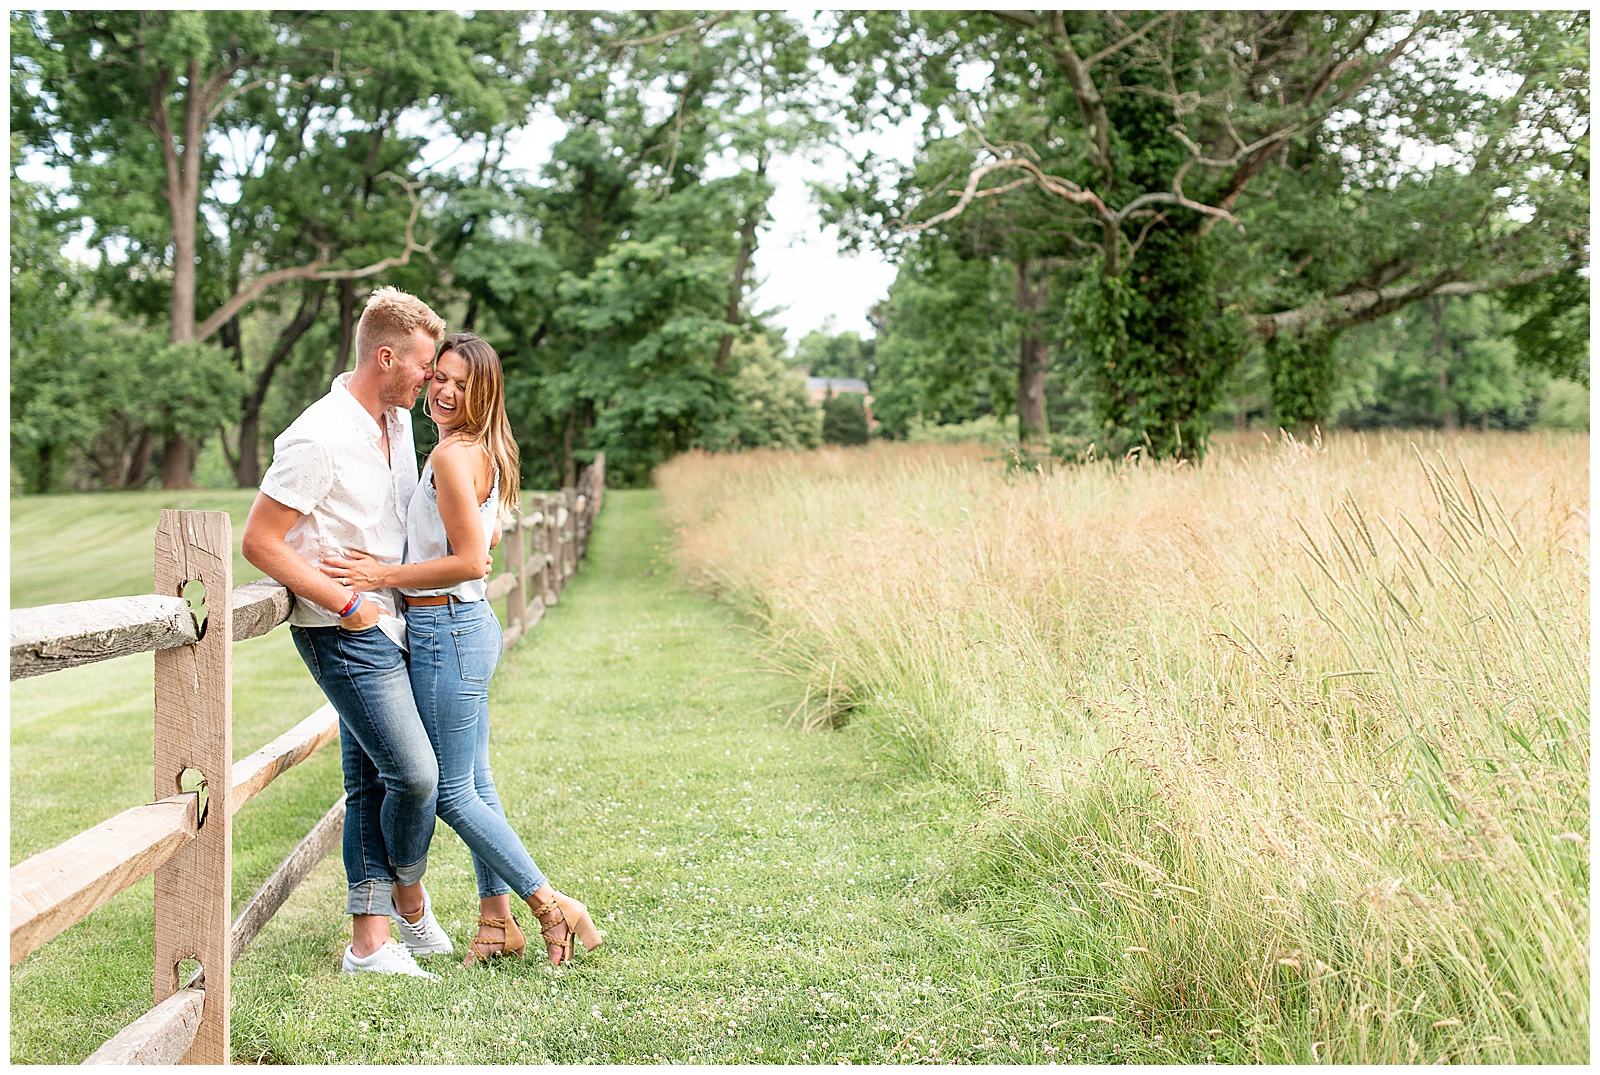 couple leaning against wood fence with tall grasses beside and girl smiles off camera while guy nuzzles in